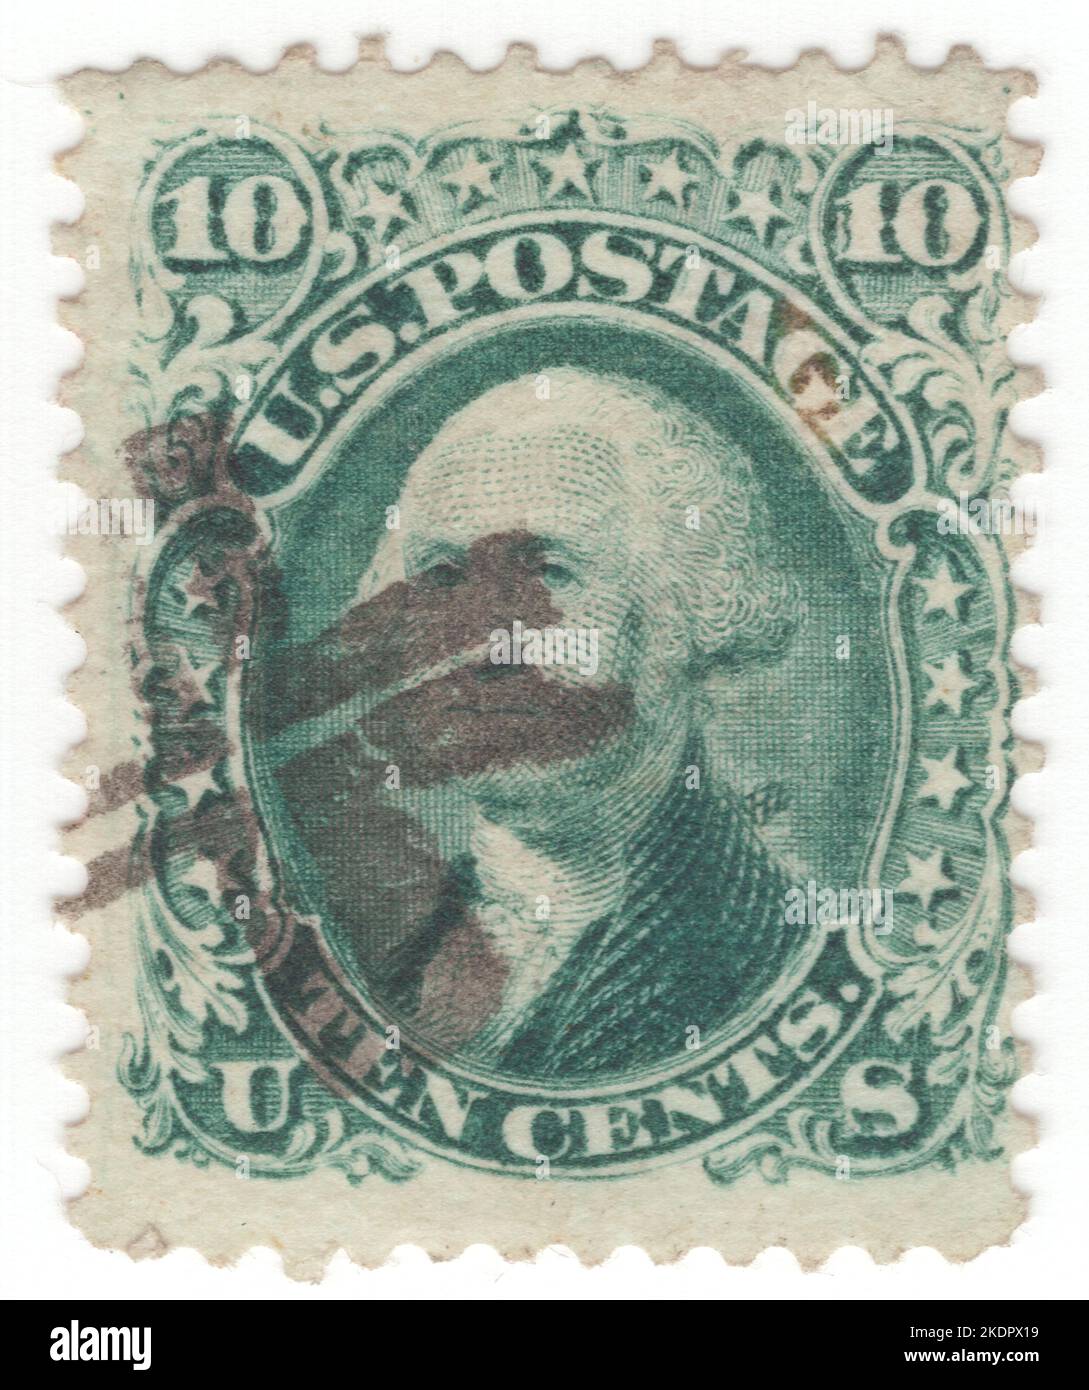 USA - 1861: An 10 cents green postage stamp depicting portrait of George Washington. American military officer, statesman, and Founding Father who served as the first president of the United States from 1789 to 1797. Appointed by the Continental Congress as commander of the Continental Army, Washington led the Patriot forces to victory in the American Revolutionary War and served as the president of the Constitutional Convention of 1787, which created the Constitution of the United States and the American federal government. Washington has been called the 'Father of his Country' Stock Photo